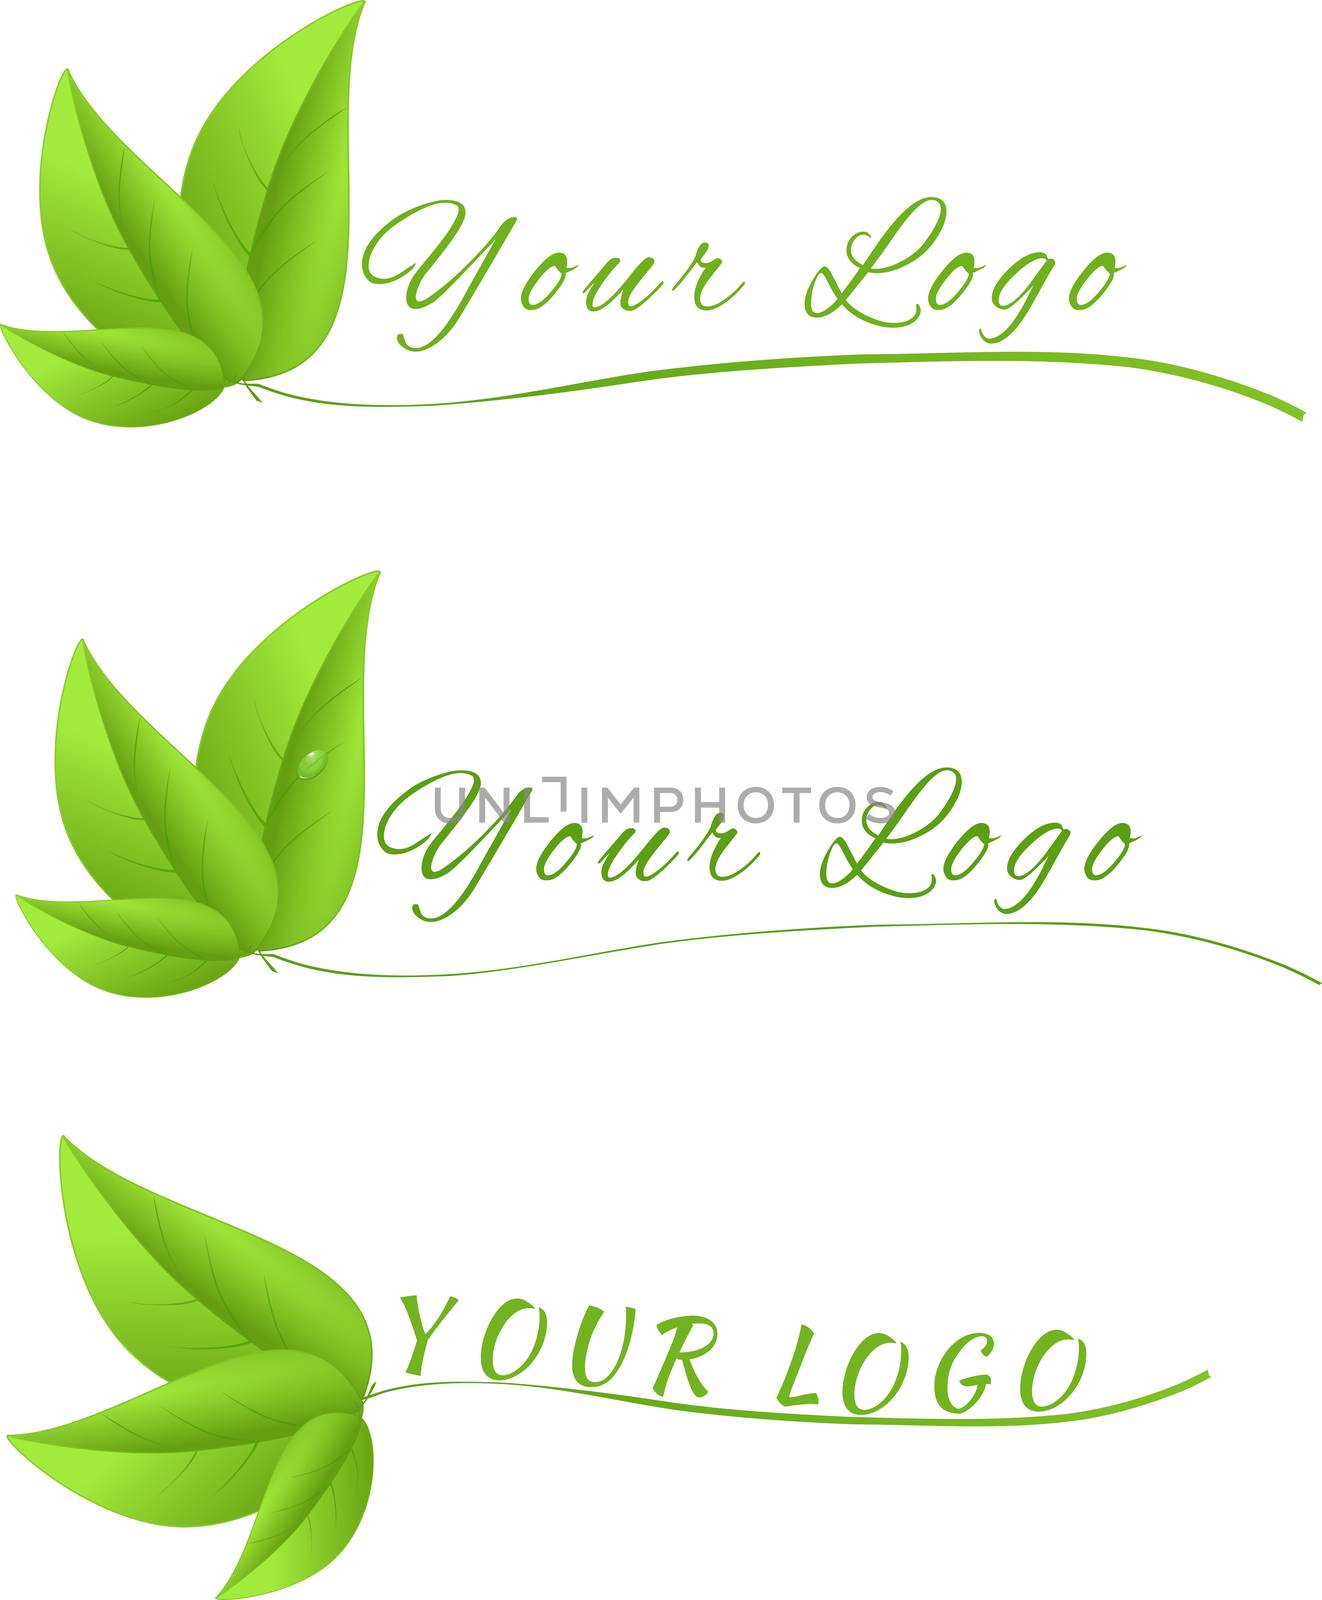 Brand logos made from leaves isolated on a white background